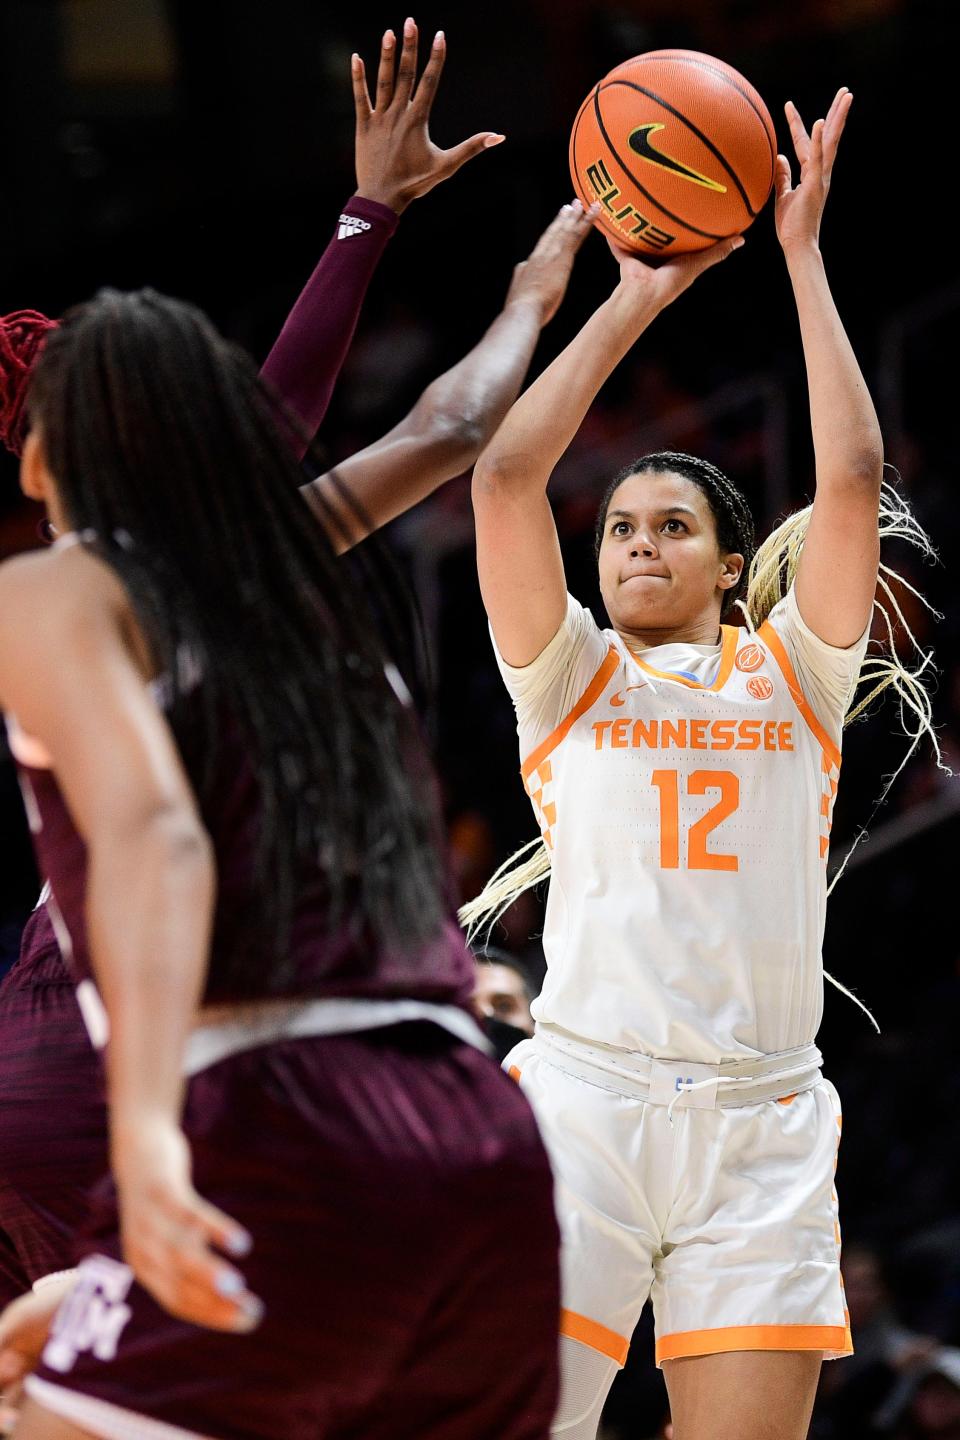 Tennessee guard/forward Rae Burrell (12) shoots the ball during a game between Tennessee and Texas A&M at Thompson-Boling Arena in Knoxville, Tenn. on Thursday, Jan. 6, 2022.